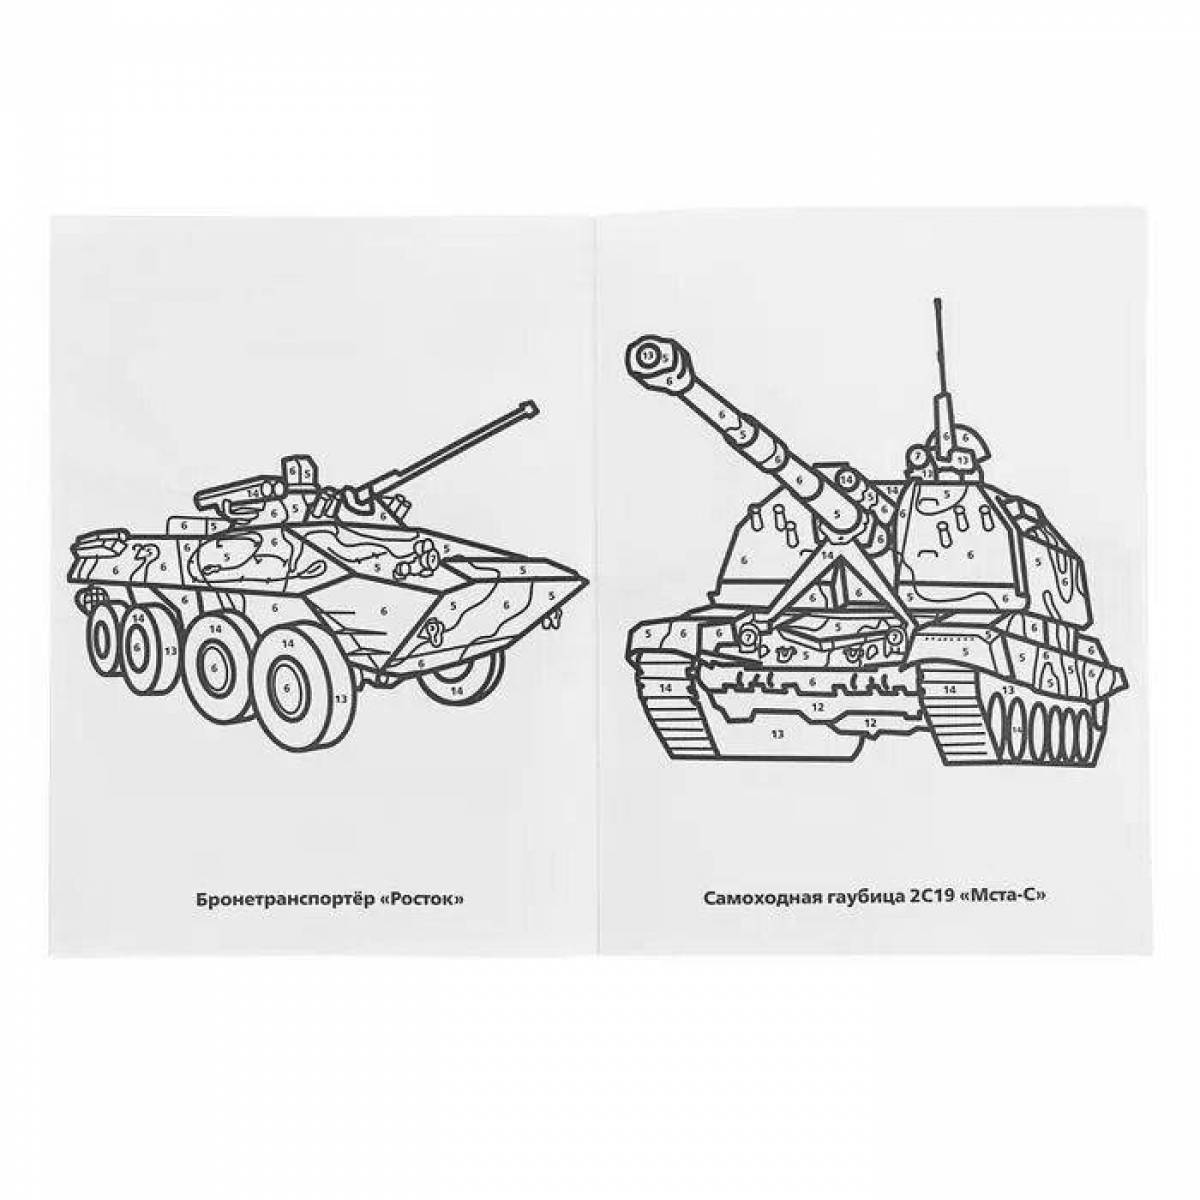 Tank coloring by numbers